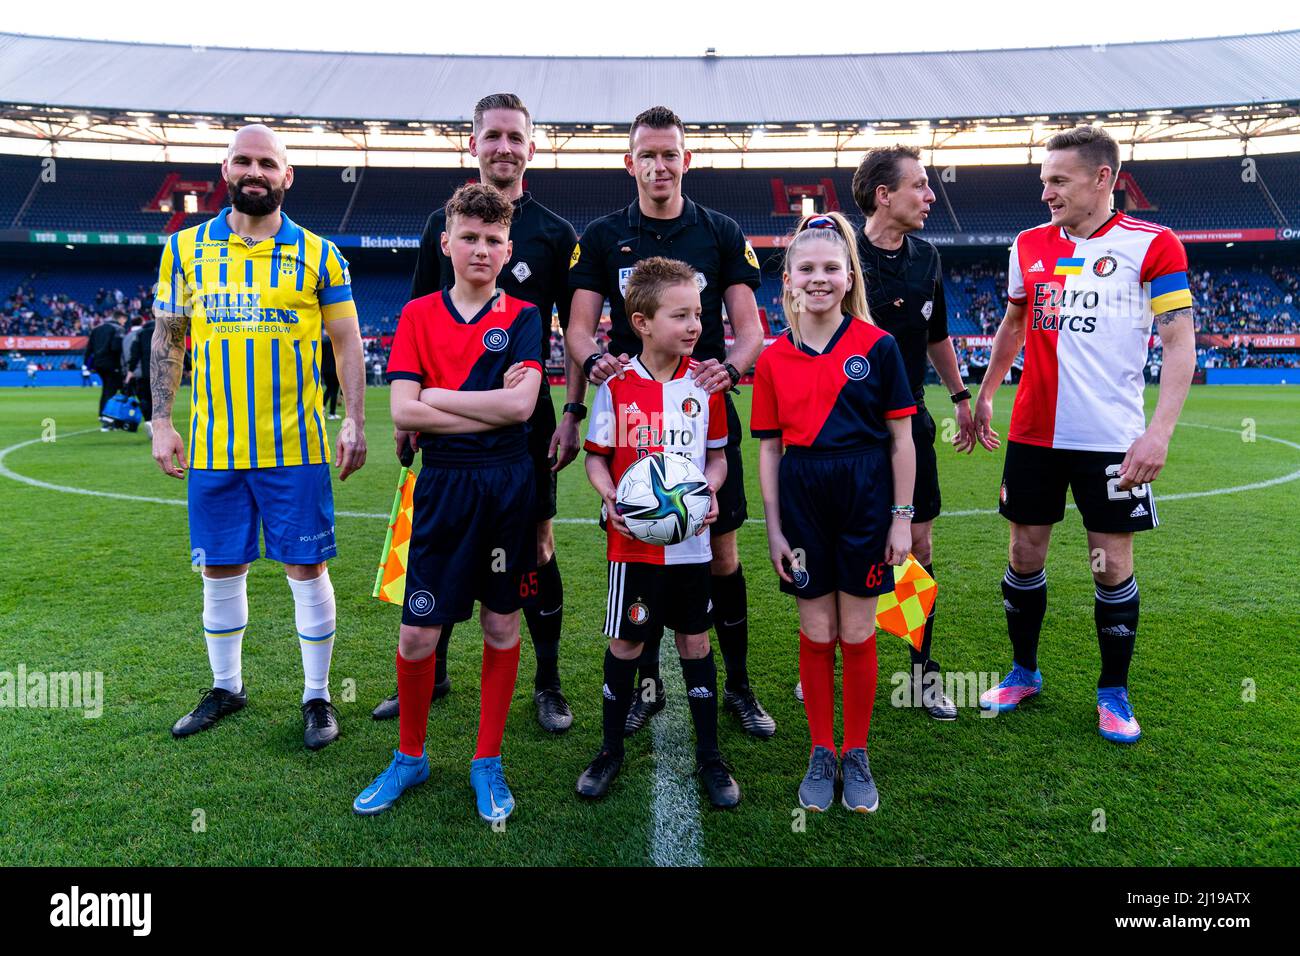 Rotterdam - / during the charity match between Feyenoord v RKC Waalwijk at de Kuip on 23 March 2022 in Rotterdam, Netherlands. (Box to Box Pictures/Yannick Verhoeven) Stock Photo